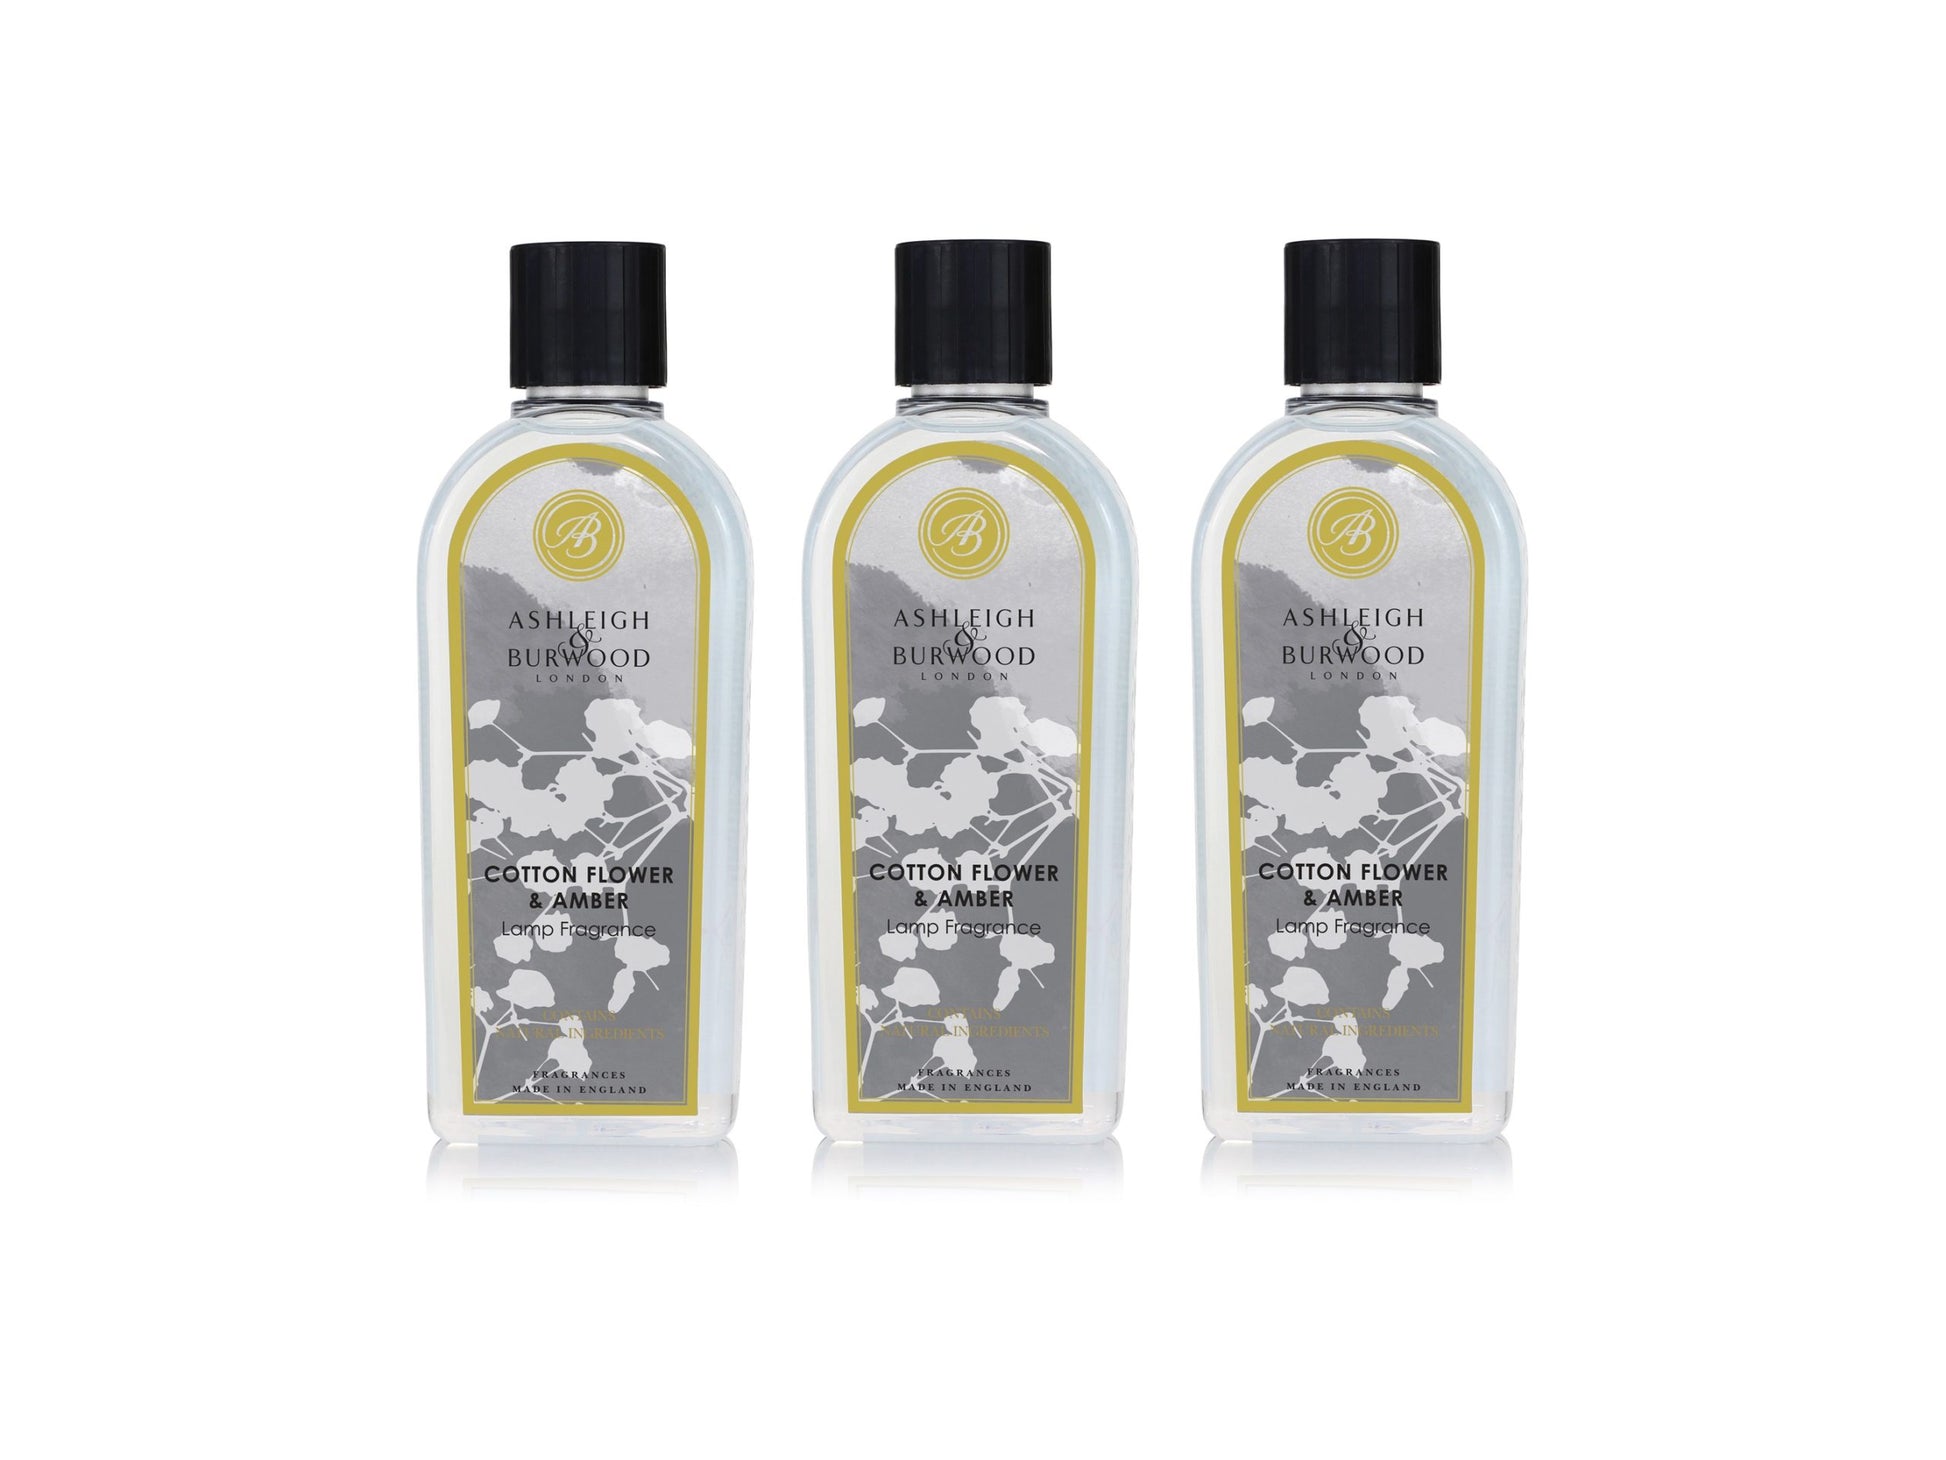 Three bottles of lamp fragrance liquid in a cotton-flower and amber scent.. The bottles are clear with floral grey labels and black lids.